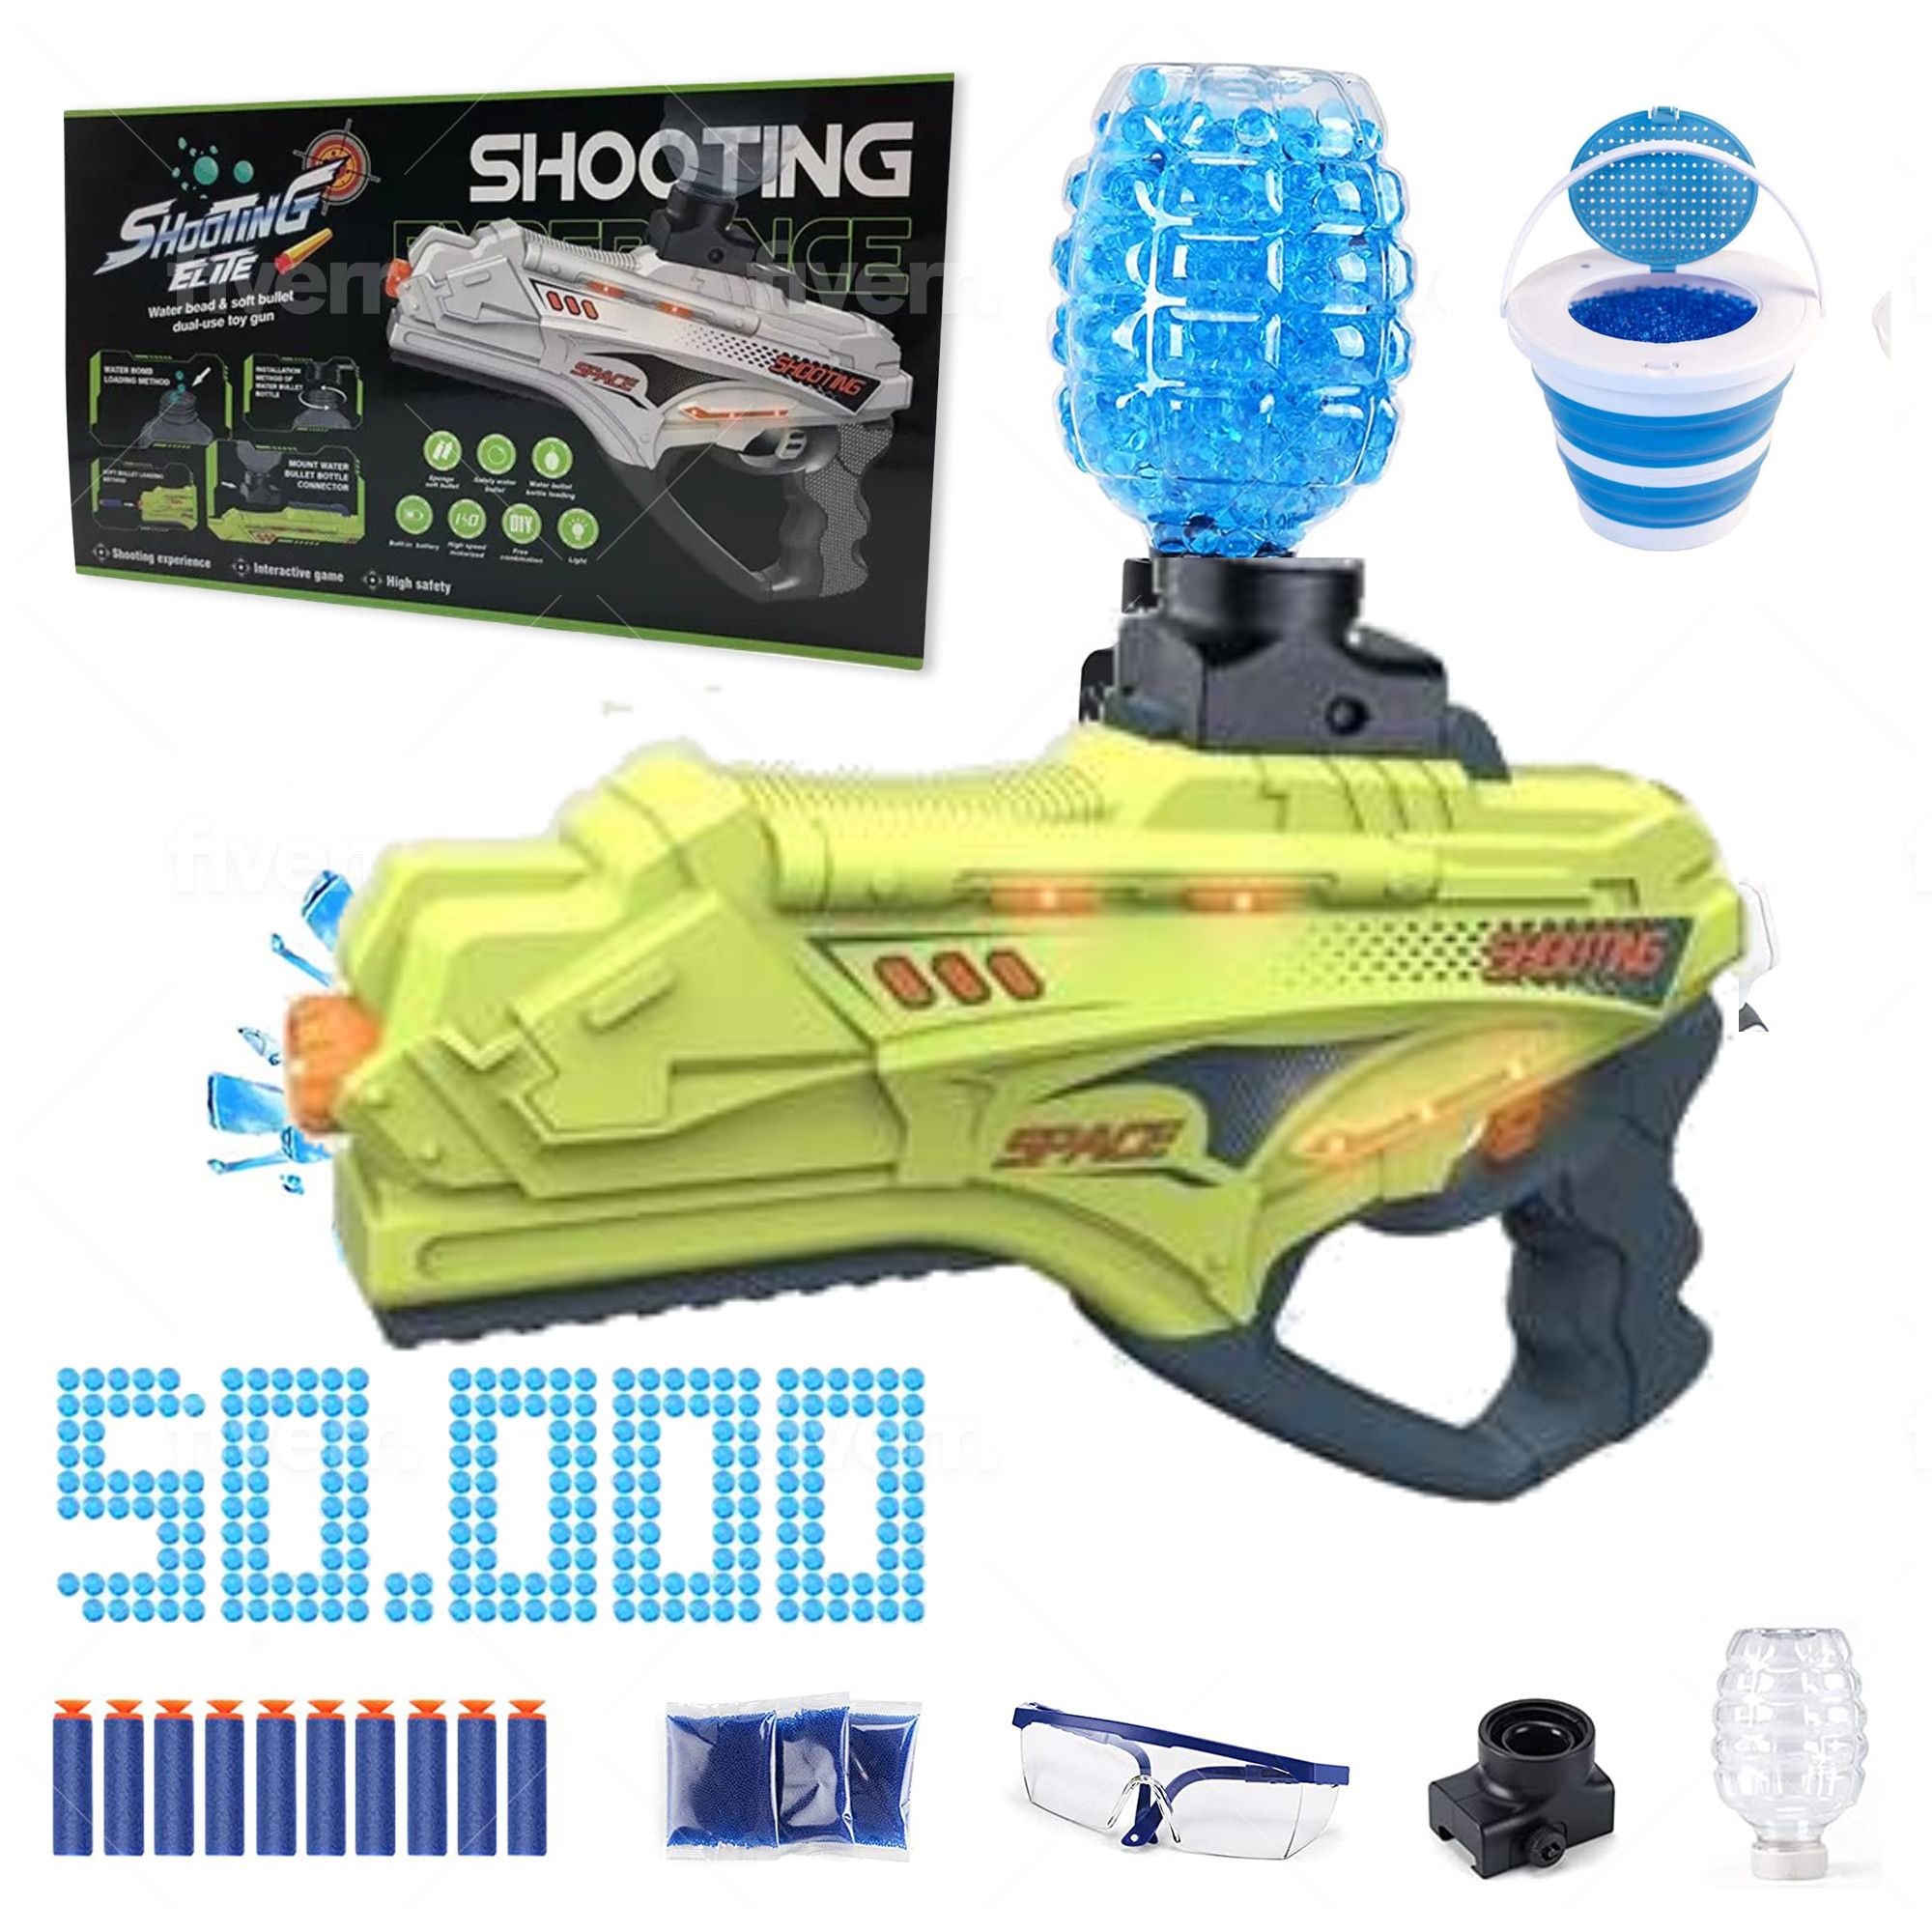 Splatter Gel Ball blaster Lime Color Gun with 50,000 Water Beads and Ammo Container